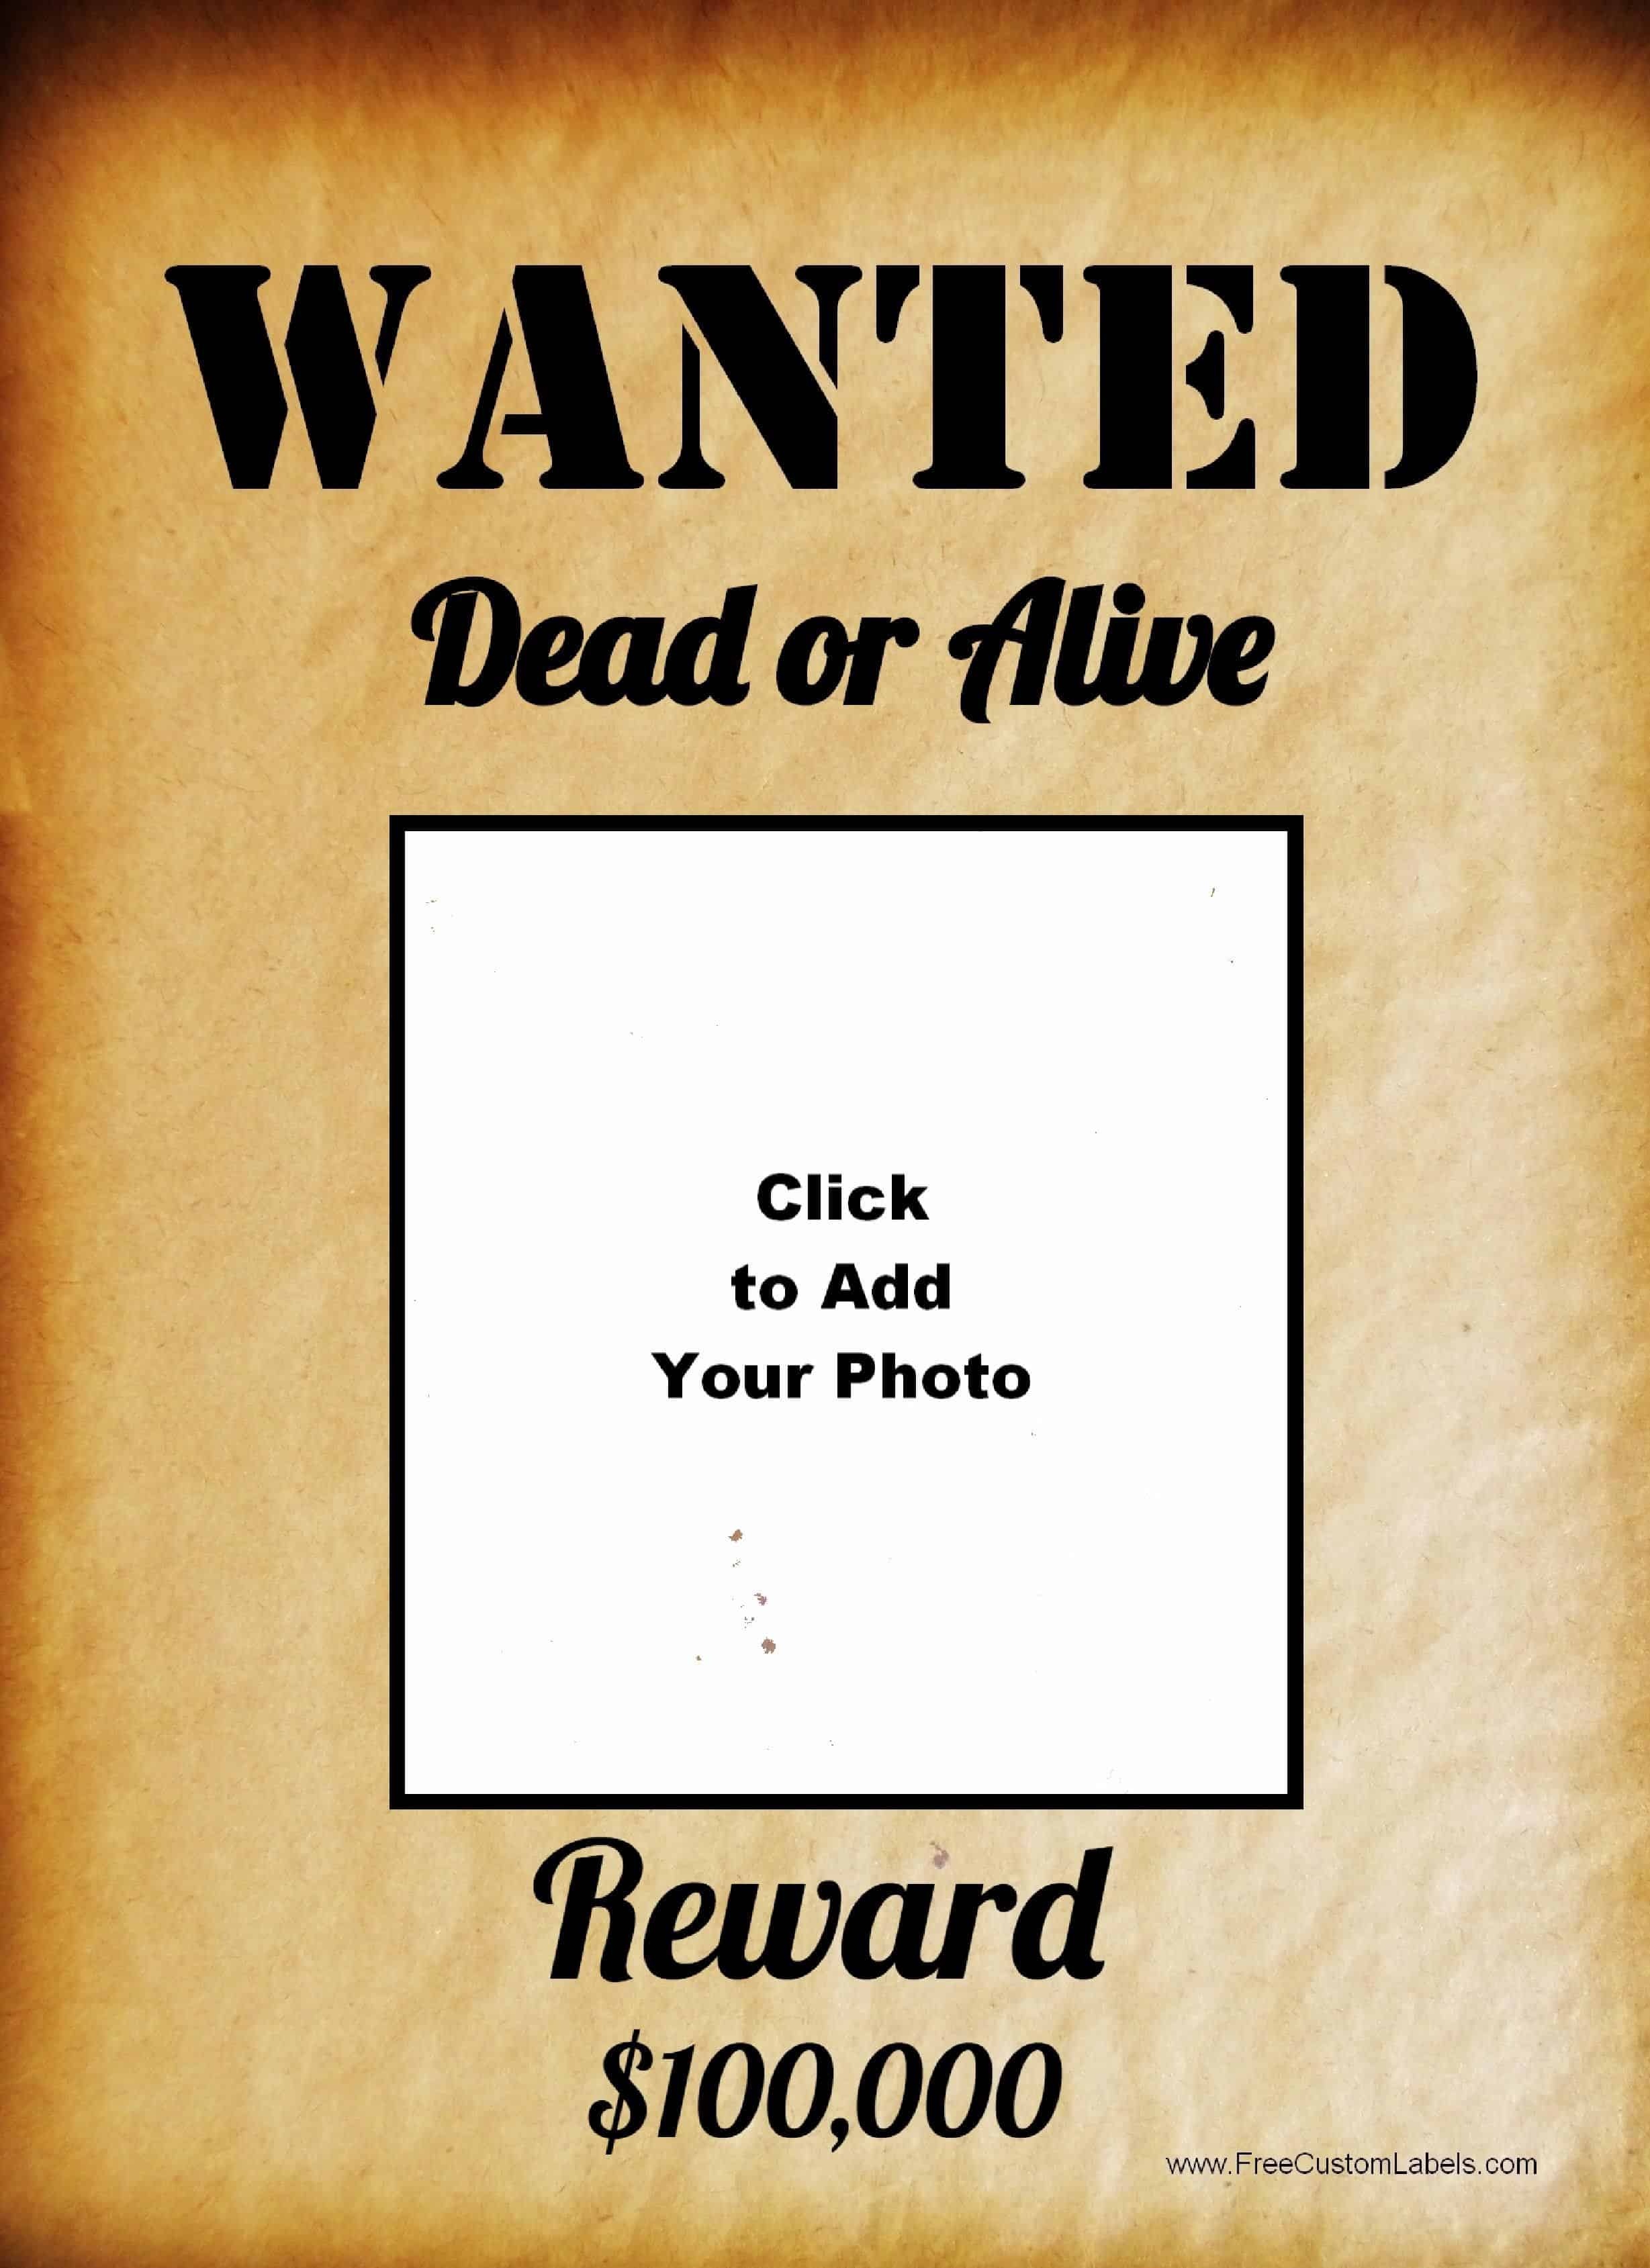 Free Wanted Poster Maker | Make A Free Printable Wanted Poster Online - Wanted Poster Printable Free